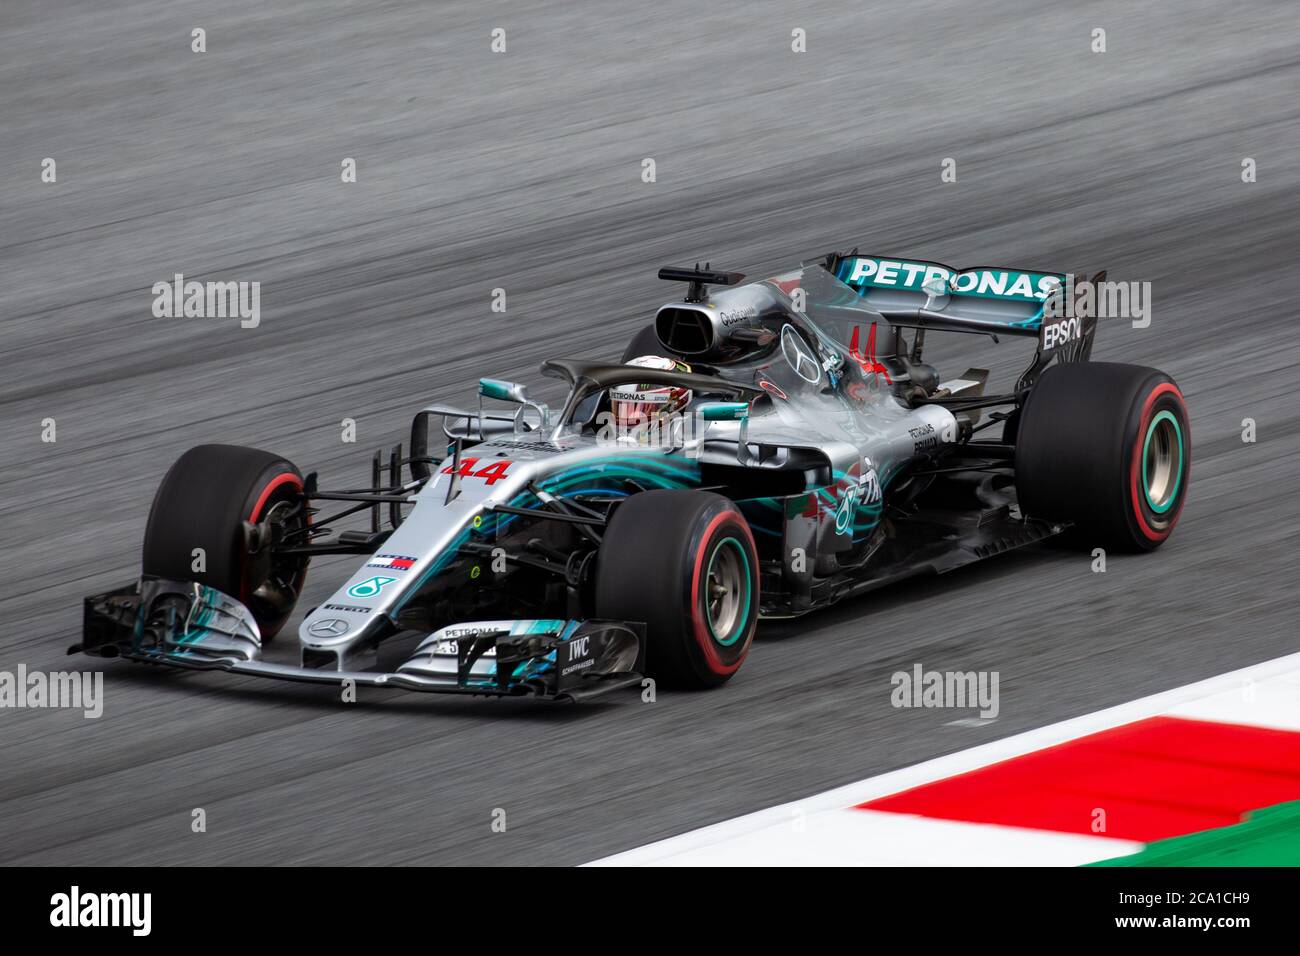 Lewis Hamilton in his Mercedes AMG F1 W08 EQ Power+ car during qualifying of the 2018 Austrian Grand Prix at the Red Bull Ring. Stock Photo